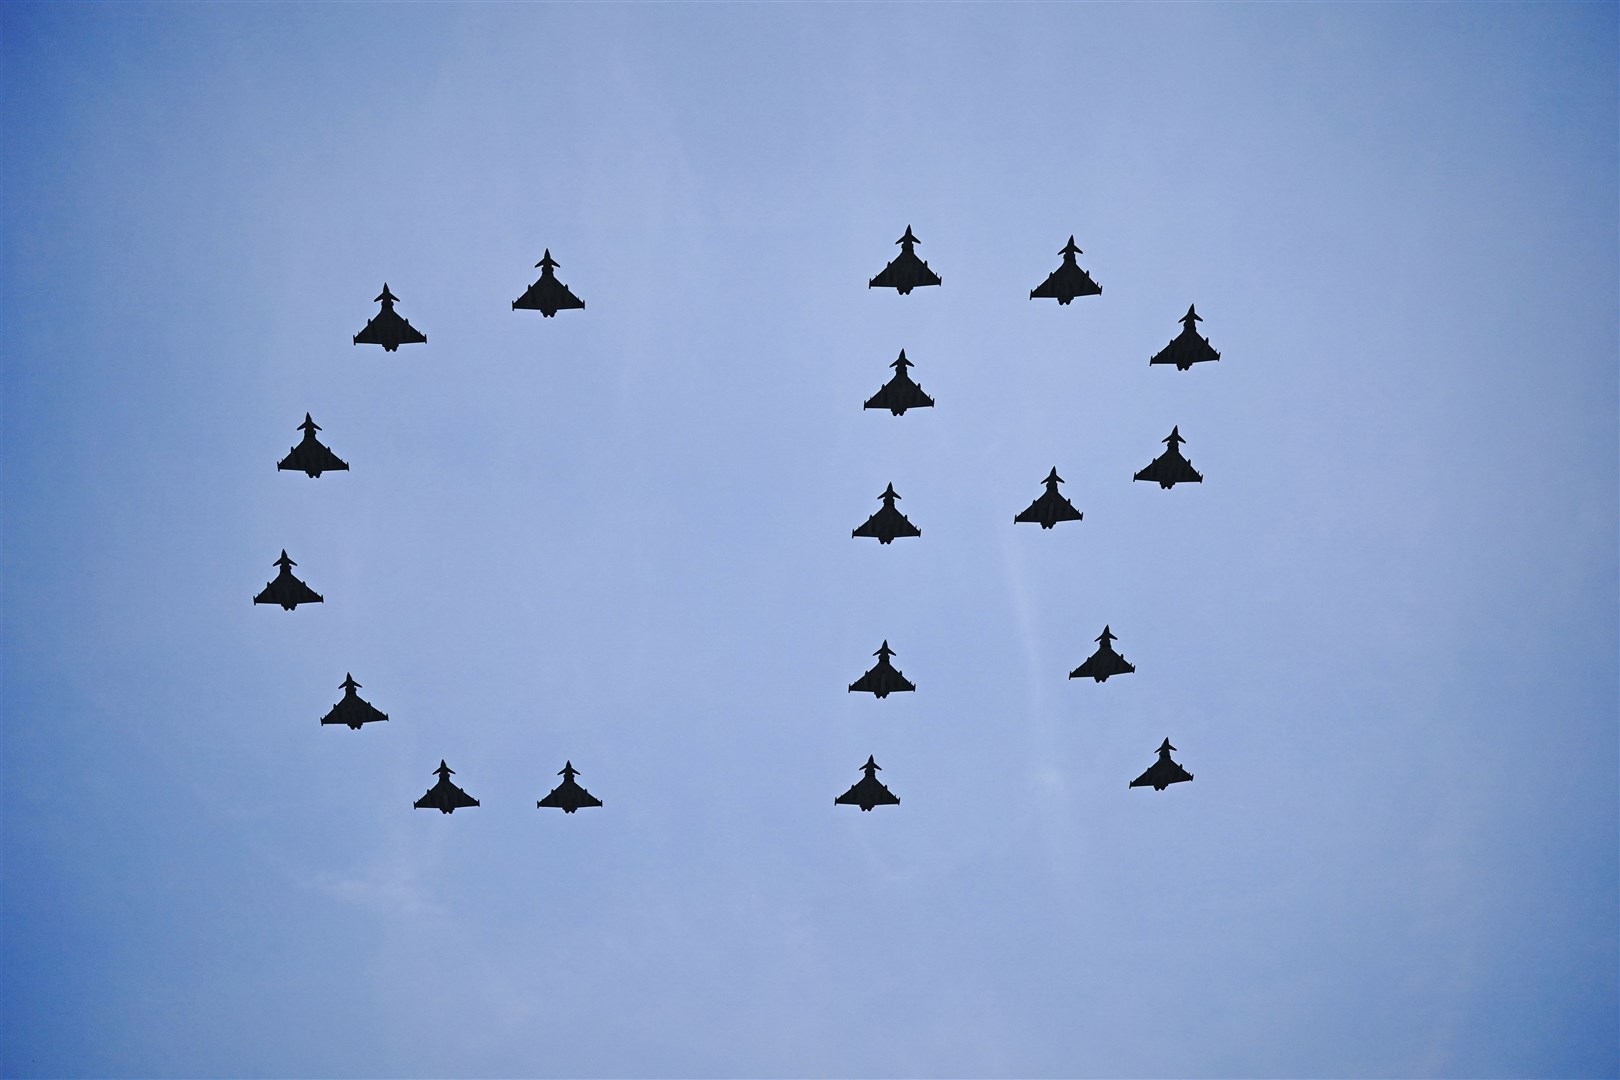 Typhoon fighter jets fly over The Mall in a CR formation (Aaron Chown/PA)